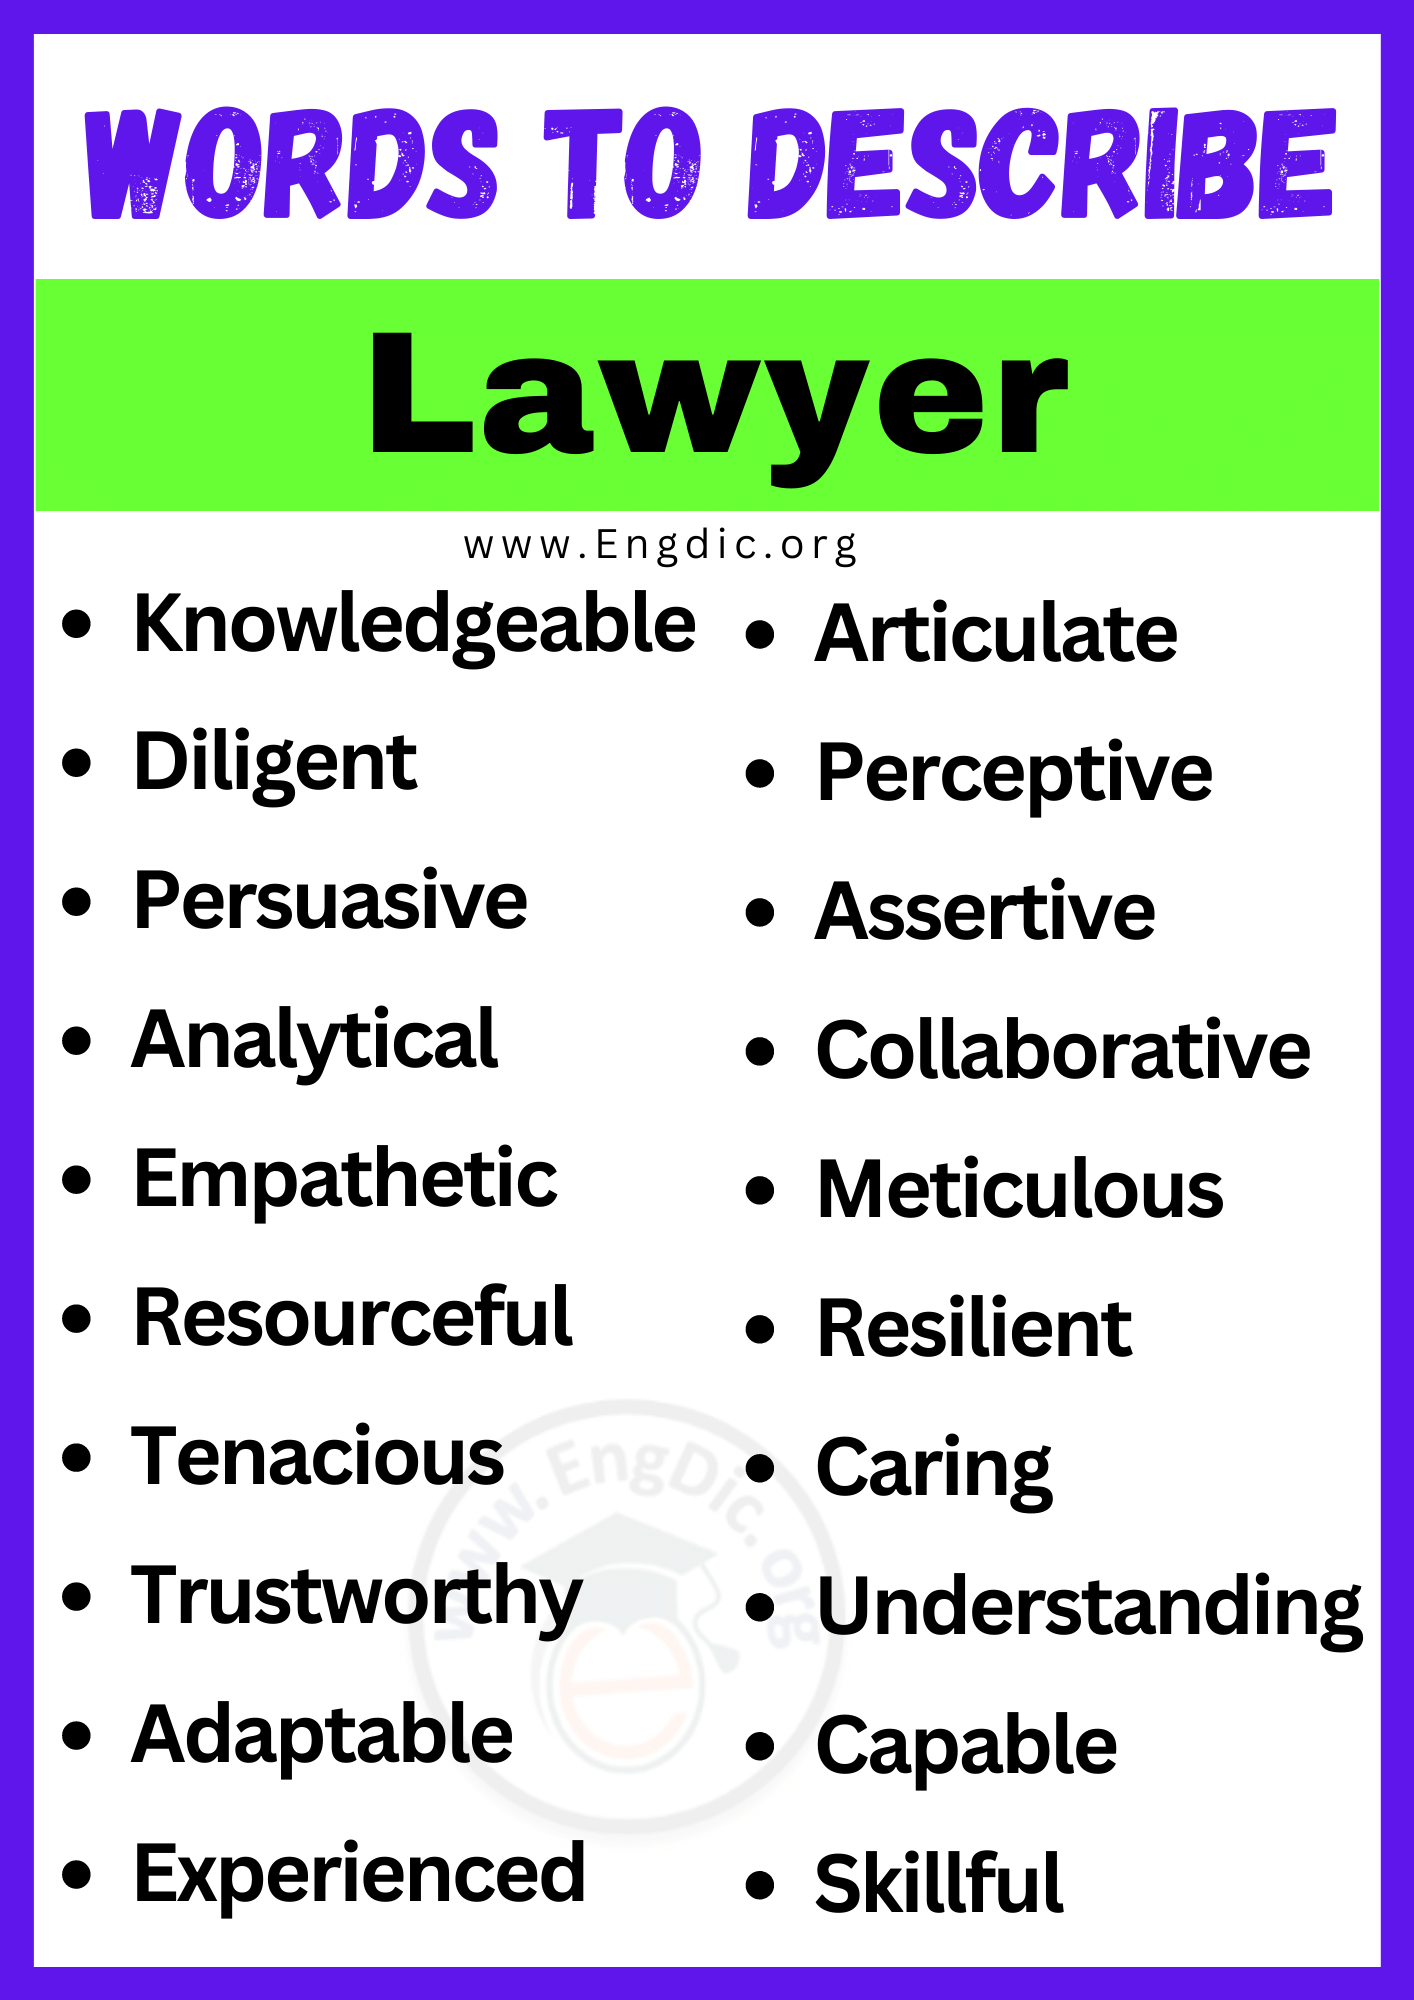 Words to Describe Lawyer